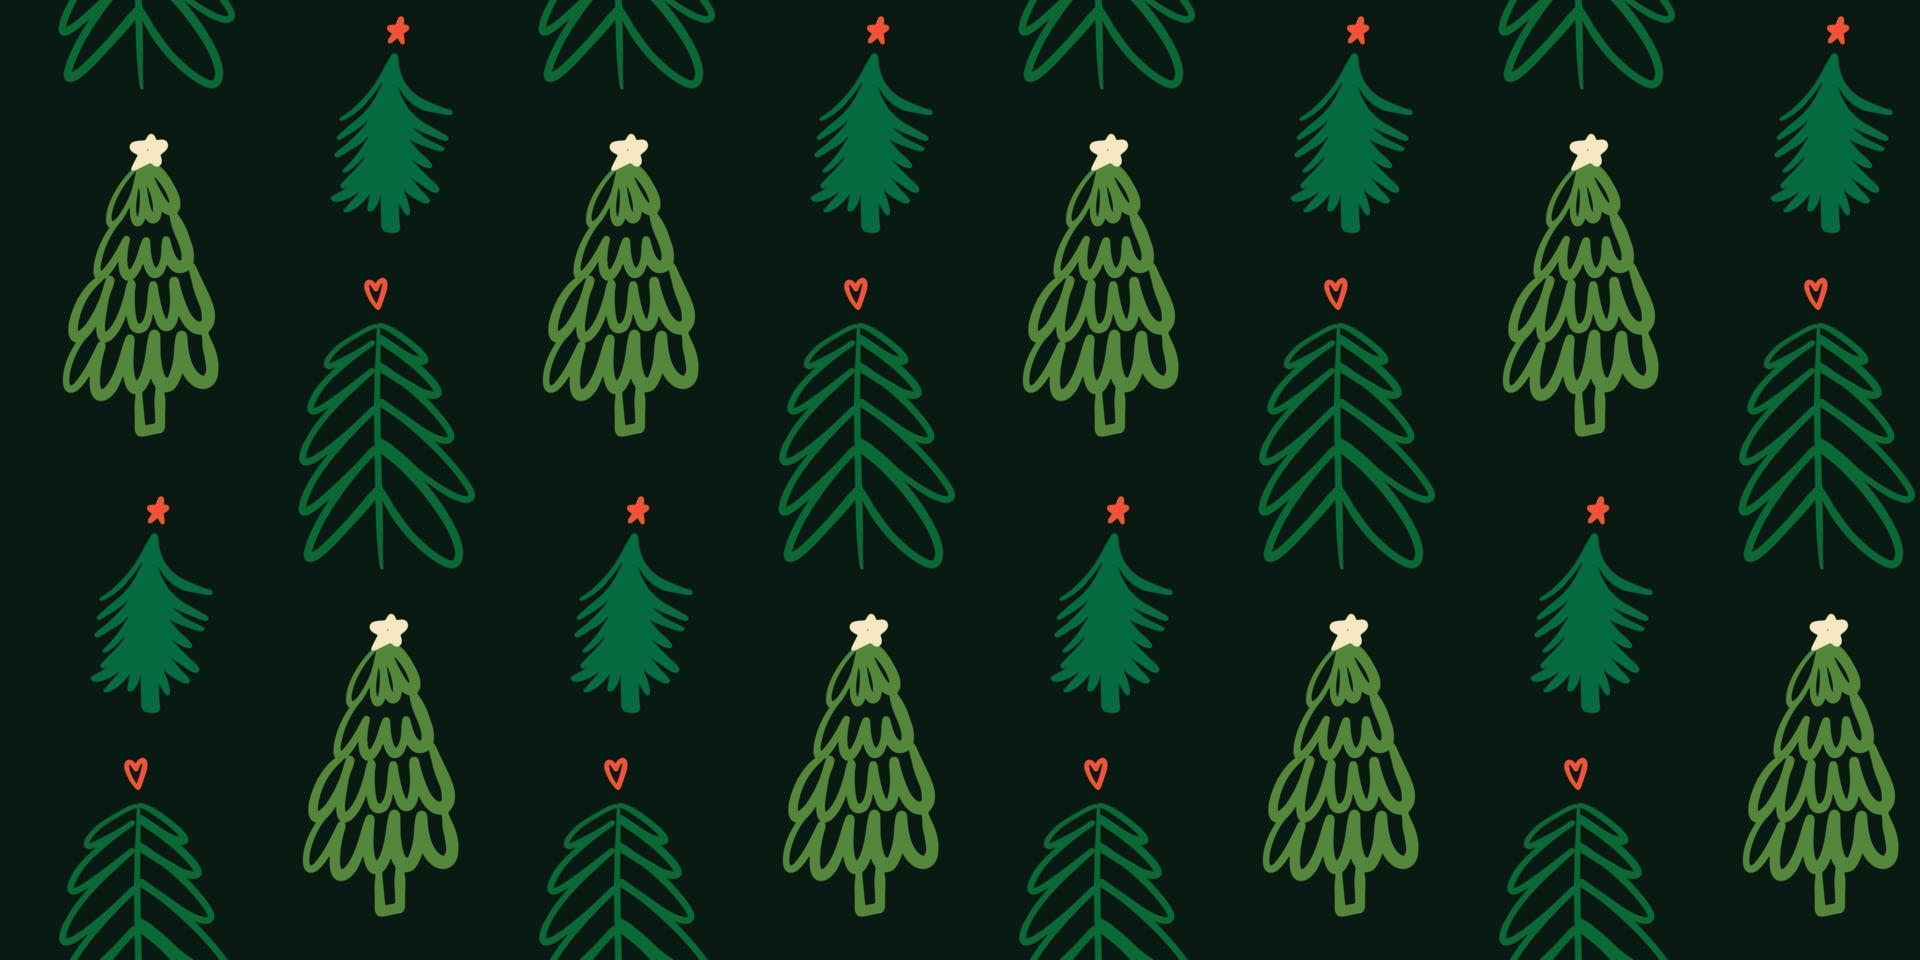 Cute dark winter seamless pattern background with Christmas tree simple doodles in childish hand drawn style. Seasonal New Year holiday festive backdrop texture, print vector